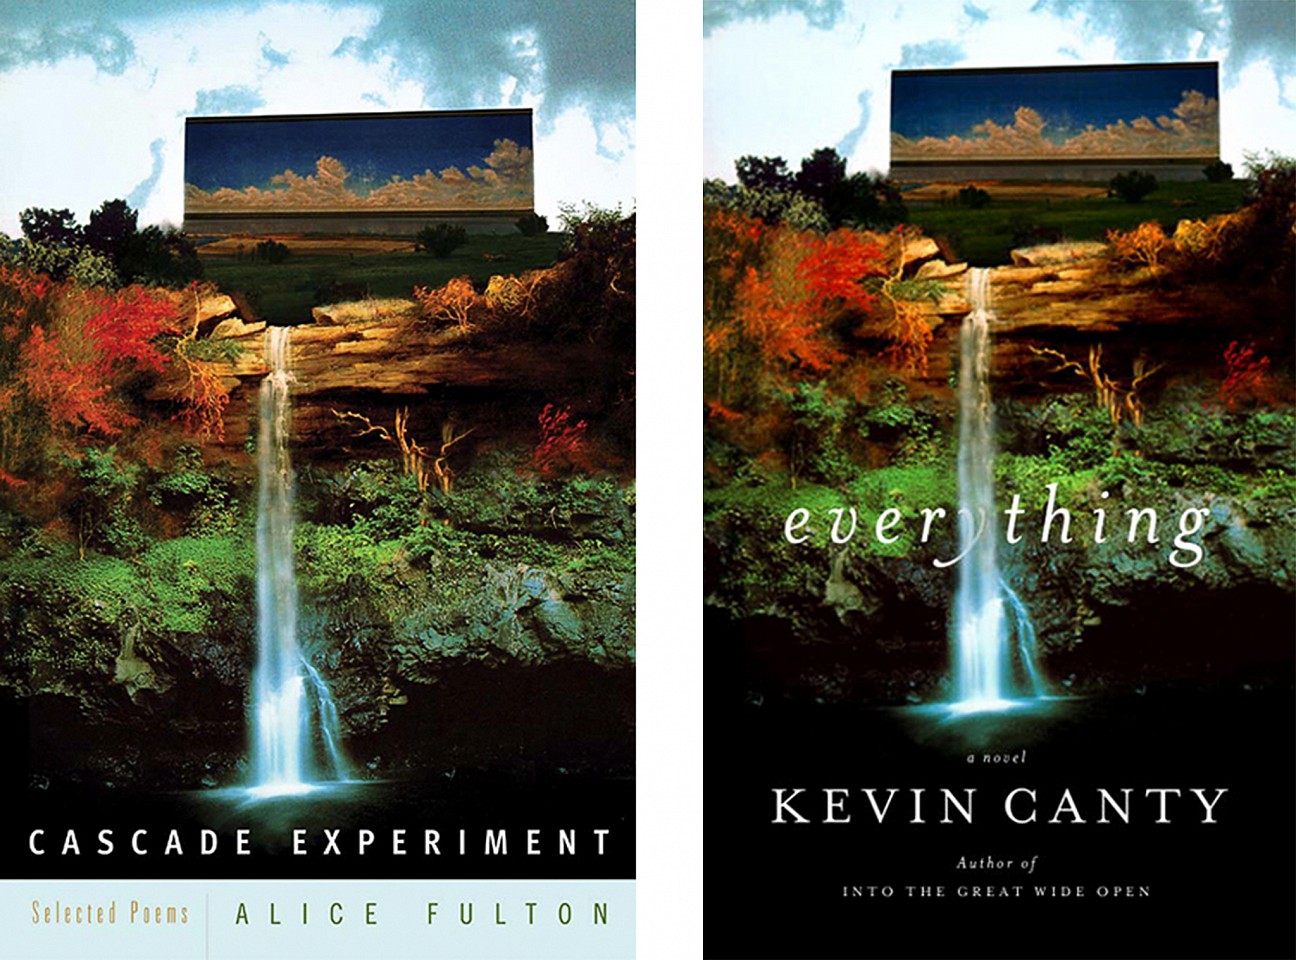 Oliver Wasow, Cascade Experiment / Everything
Commercial publication